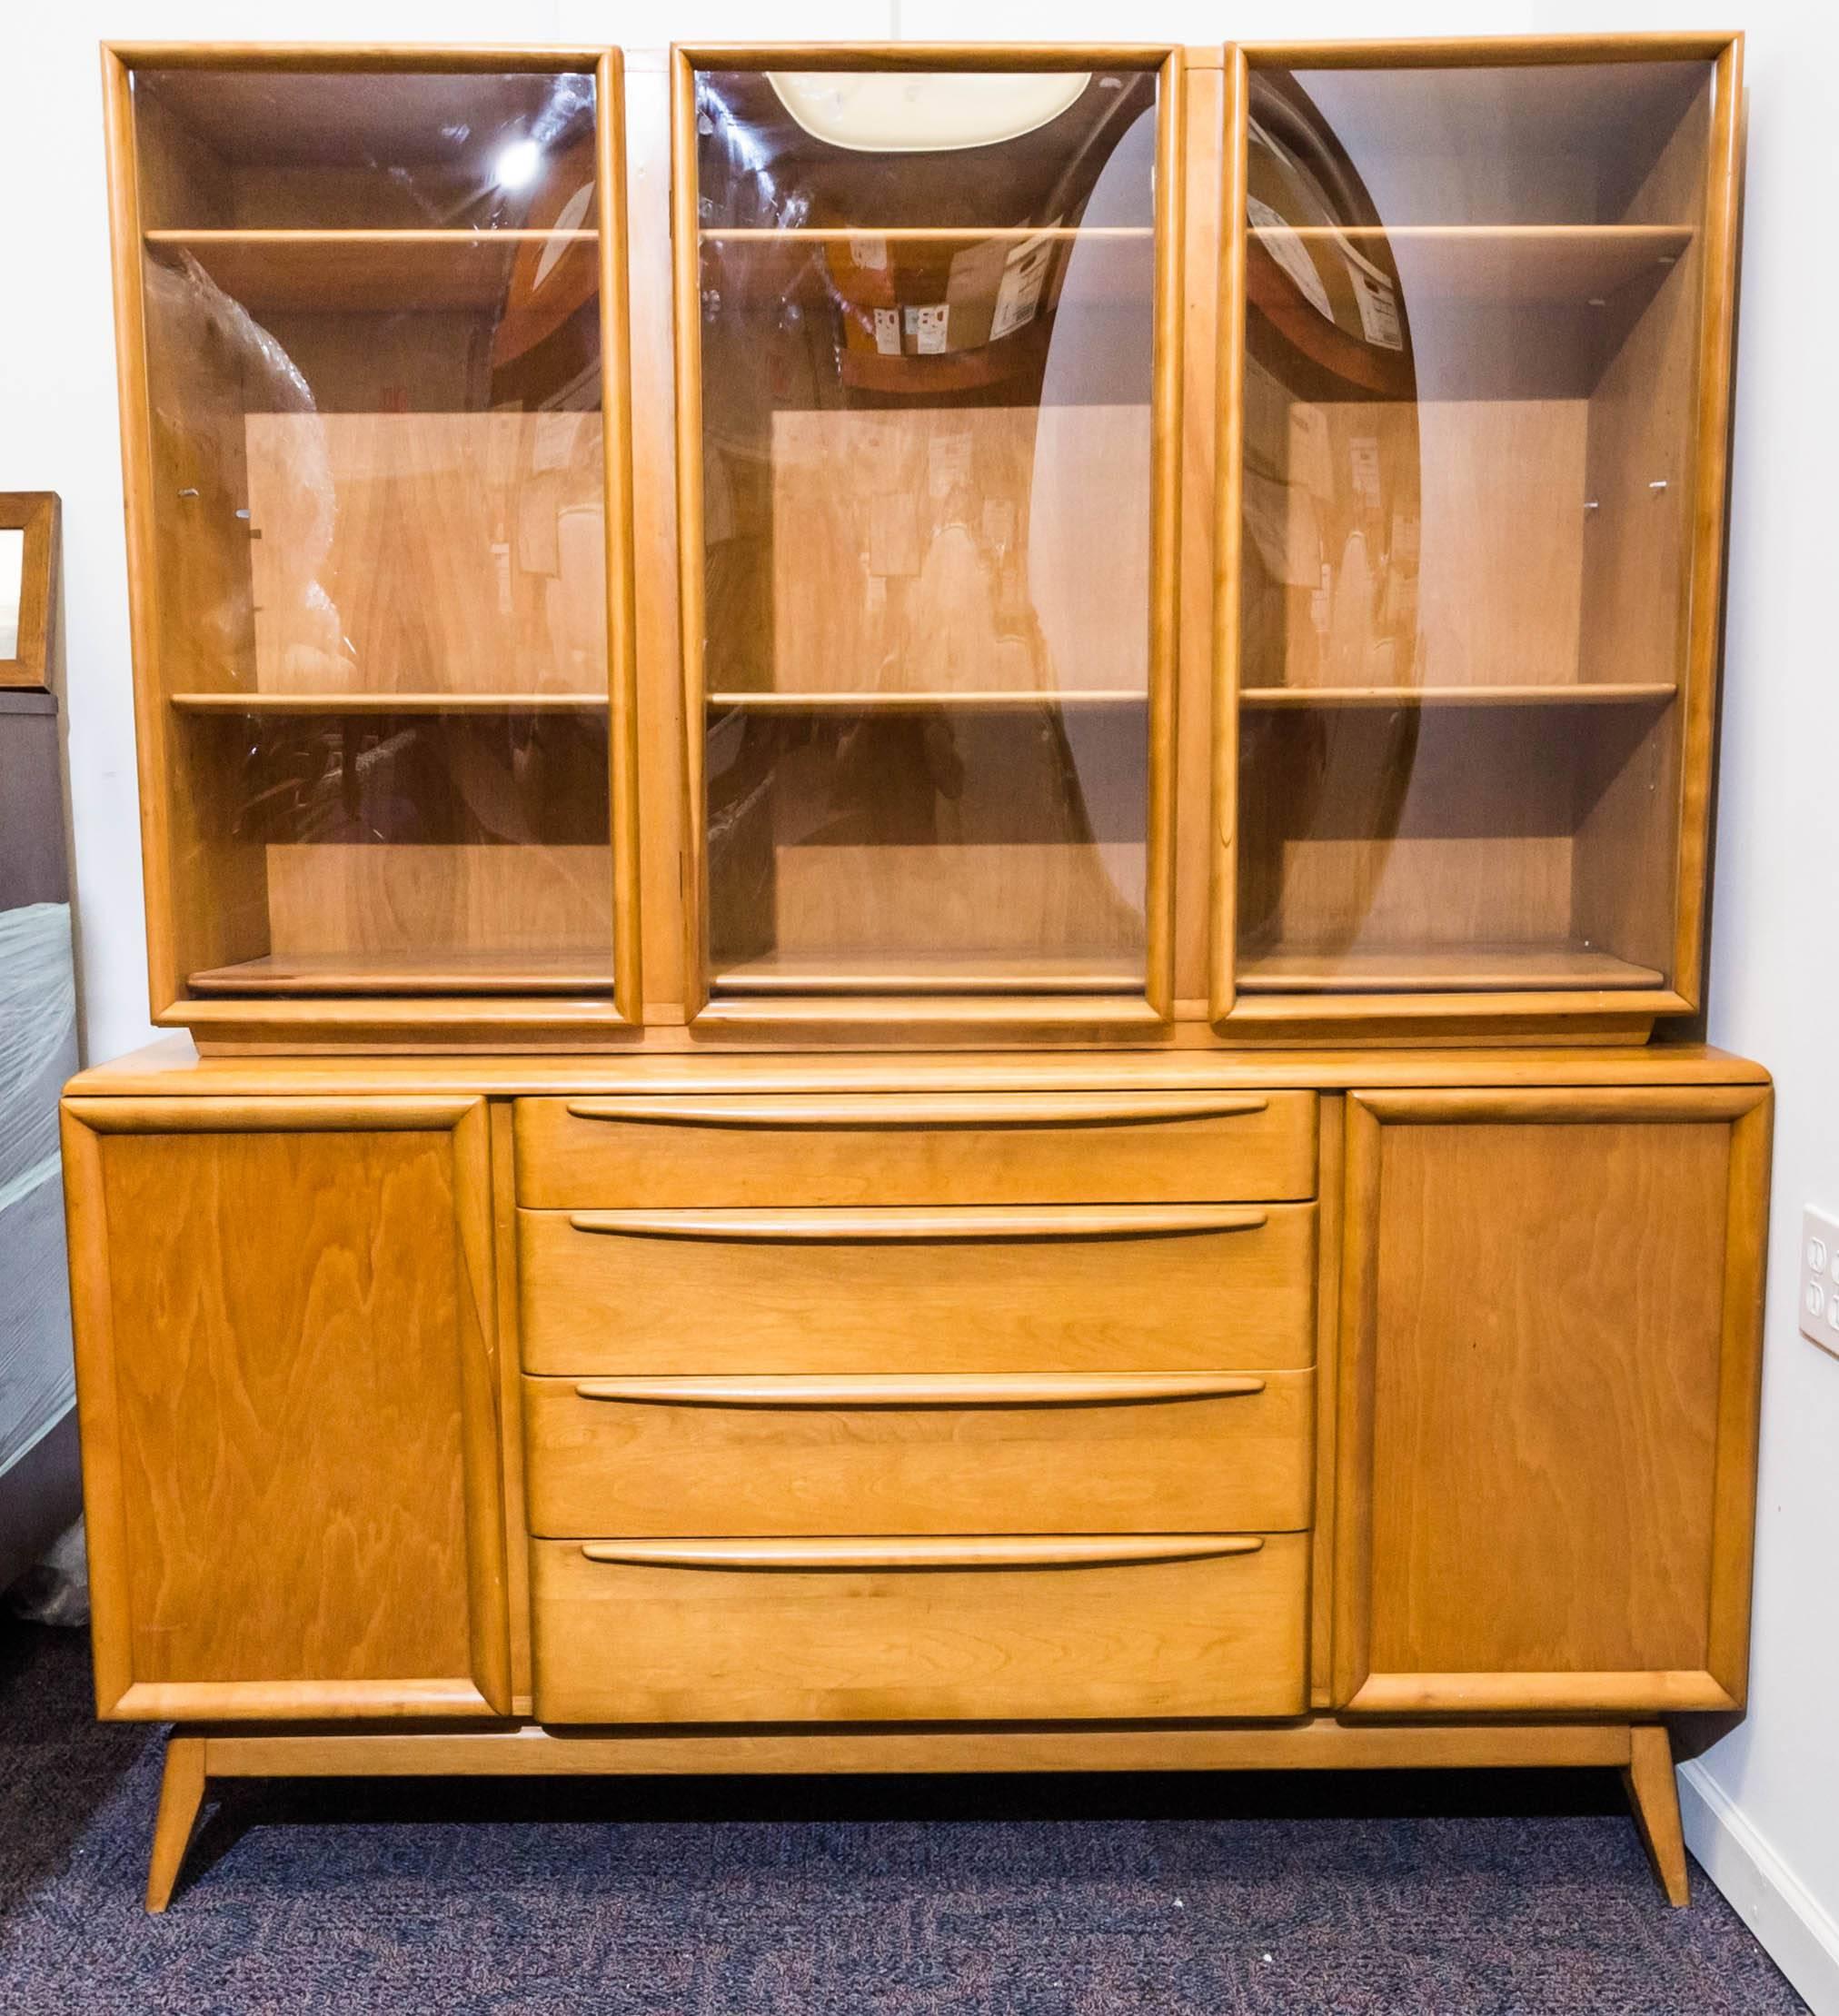 Mid-20th century Haywood-Wakefield buffet and hutch in original Champagne finish and bow glass doors.